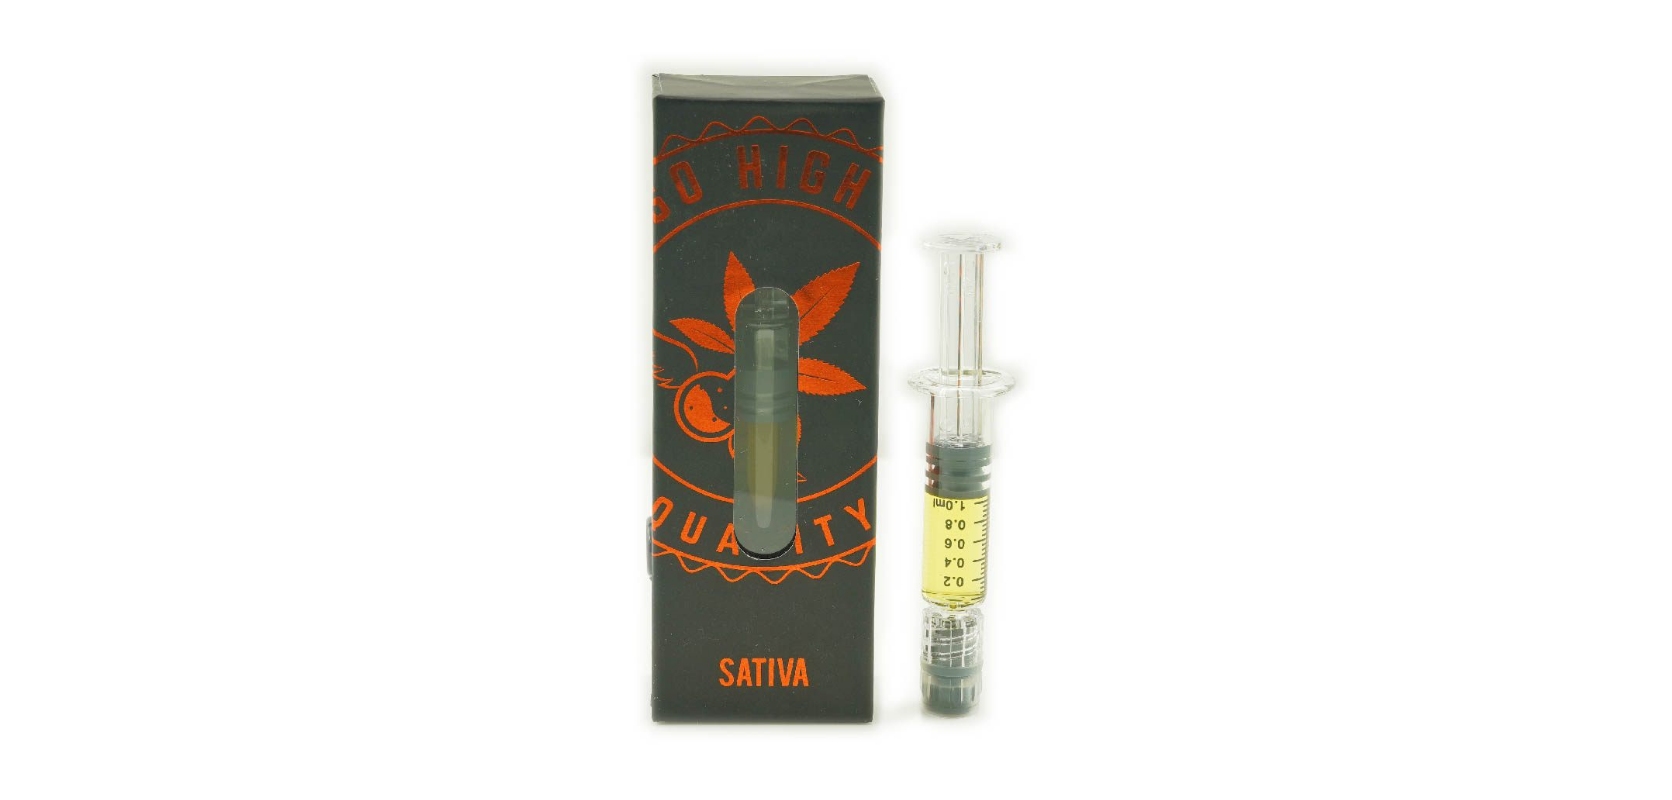 The Grape Fruit THC Syringes arer another fruity concoction featuring a Sativa-leaning hybrid with around 19 percent of THC. 